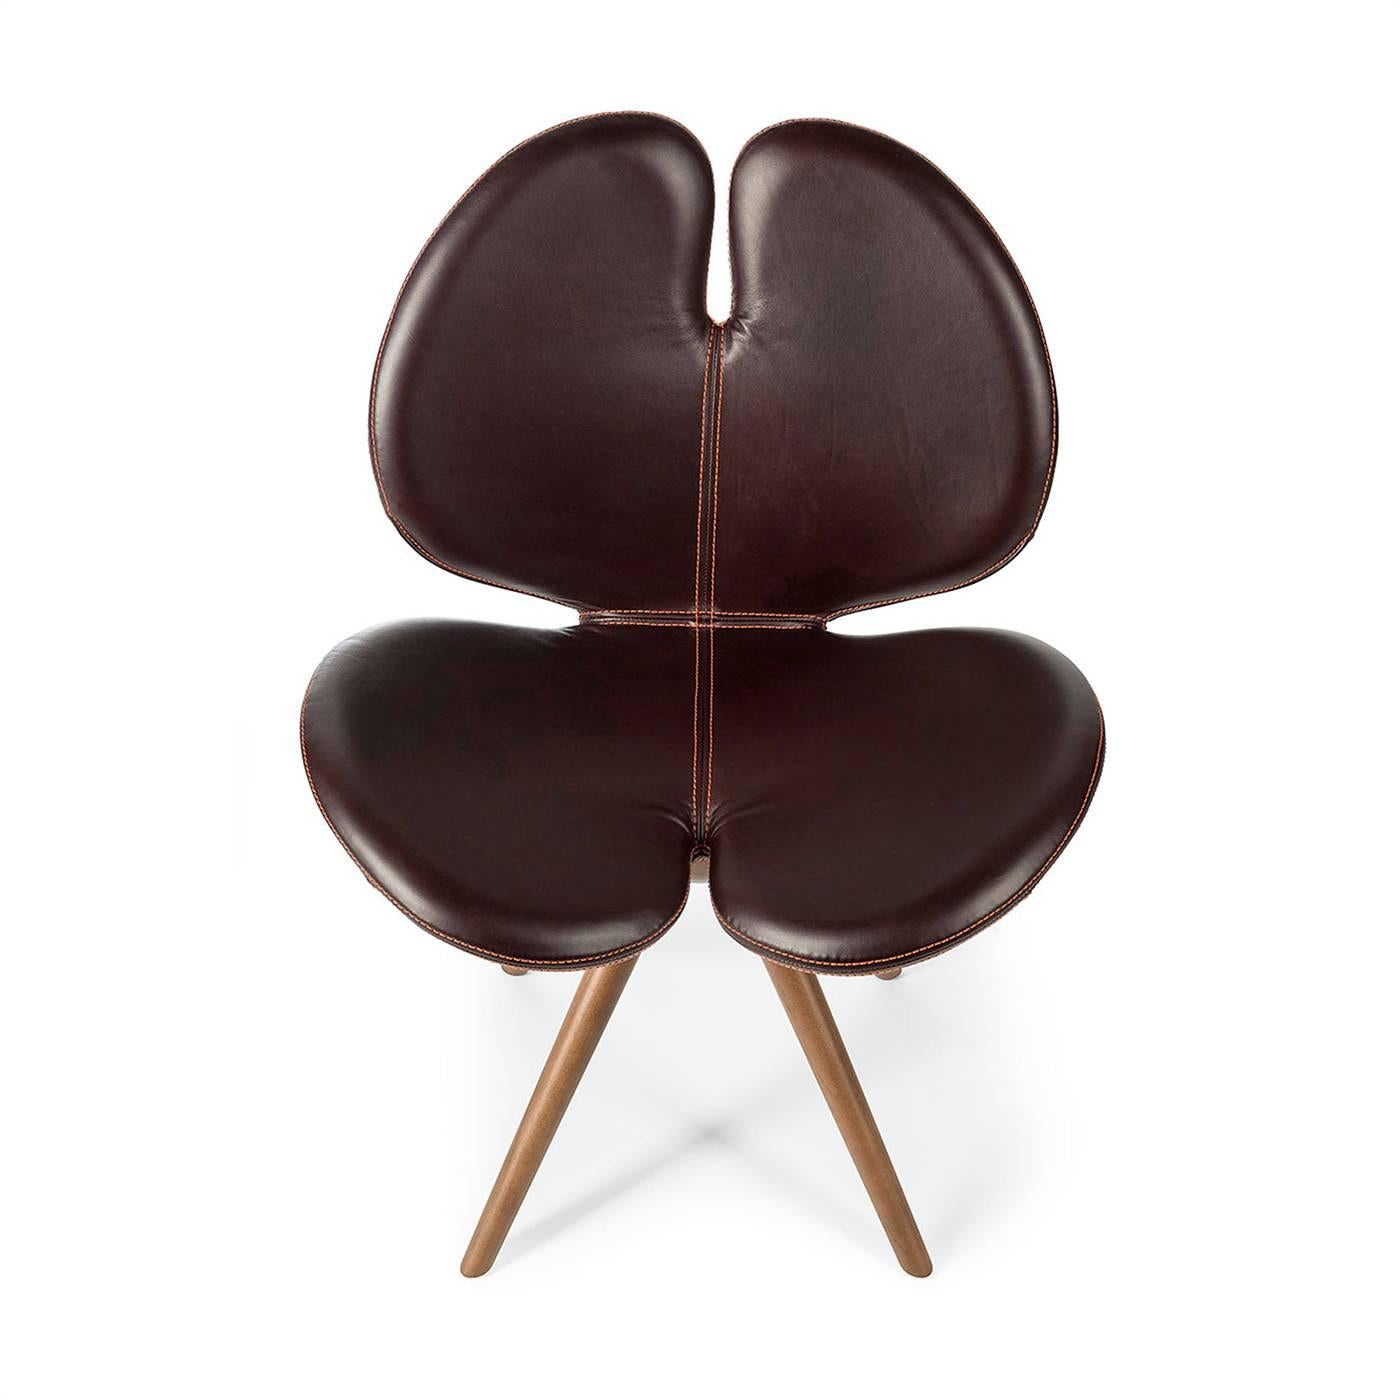 Italian New Pansè Leather and Wood Chair